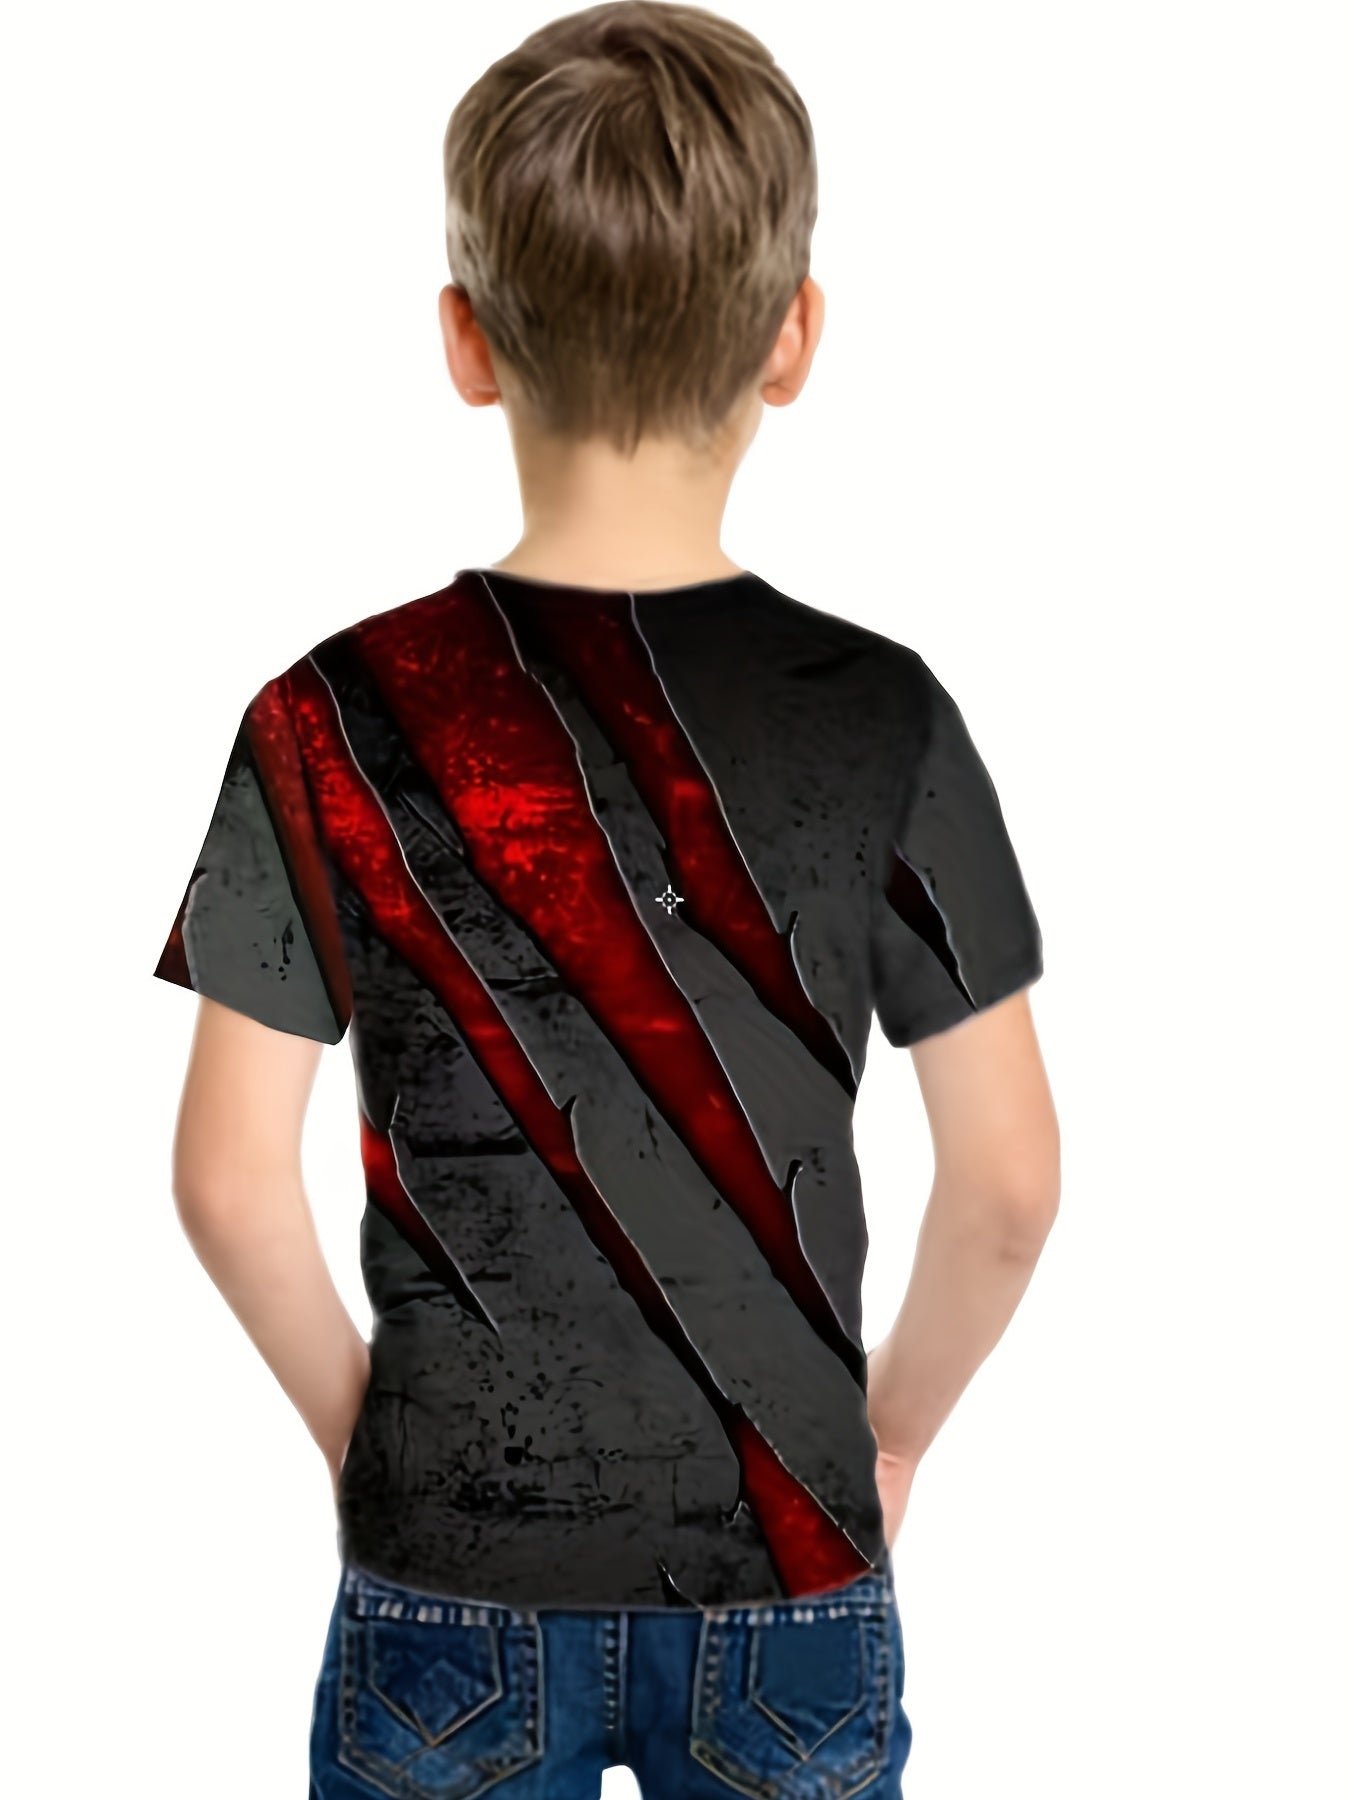 Stylish Claw 3D Print Boys Creative T-shirt, Casual Lightweight Comfy Short Sleeve Tee Tops, Kids Clothings For Summer